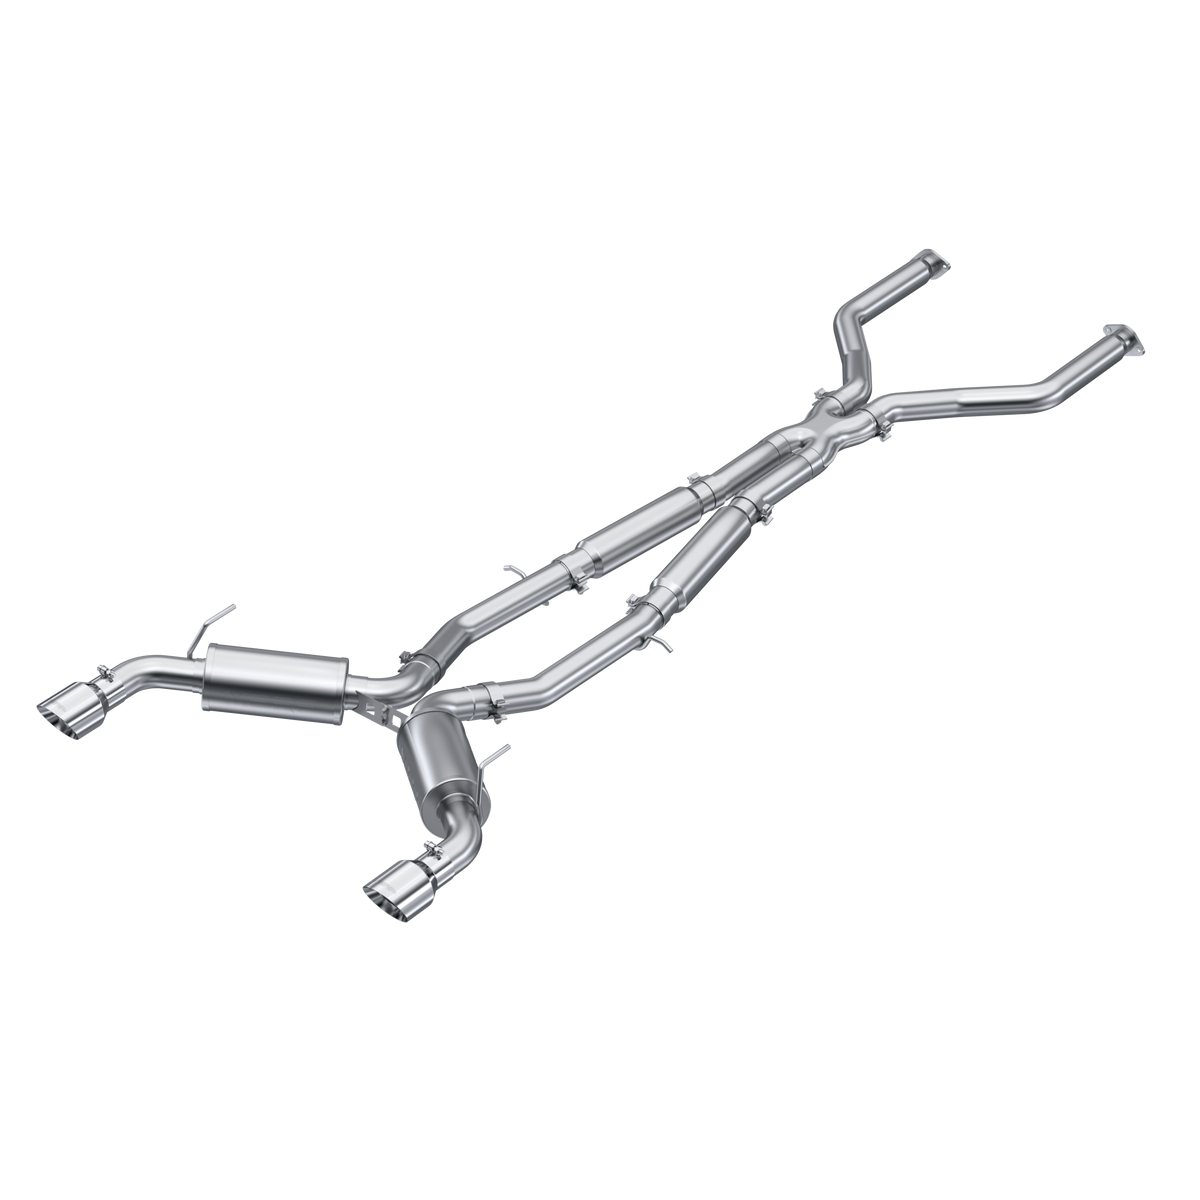 MBRP Pro Series 3" Cat-Back Exhaust System, Dual Rear Exit w/ 4.5" Stainless Steel Tips, Resonated - Infiniti Q60 3.0L RWD / AWD VR30DDTT